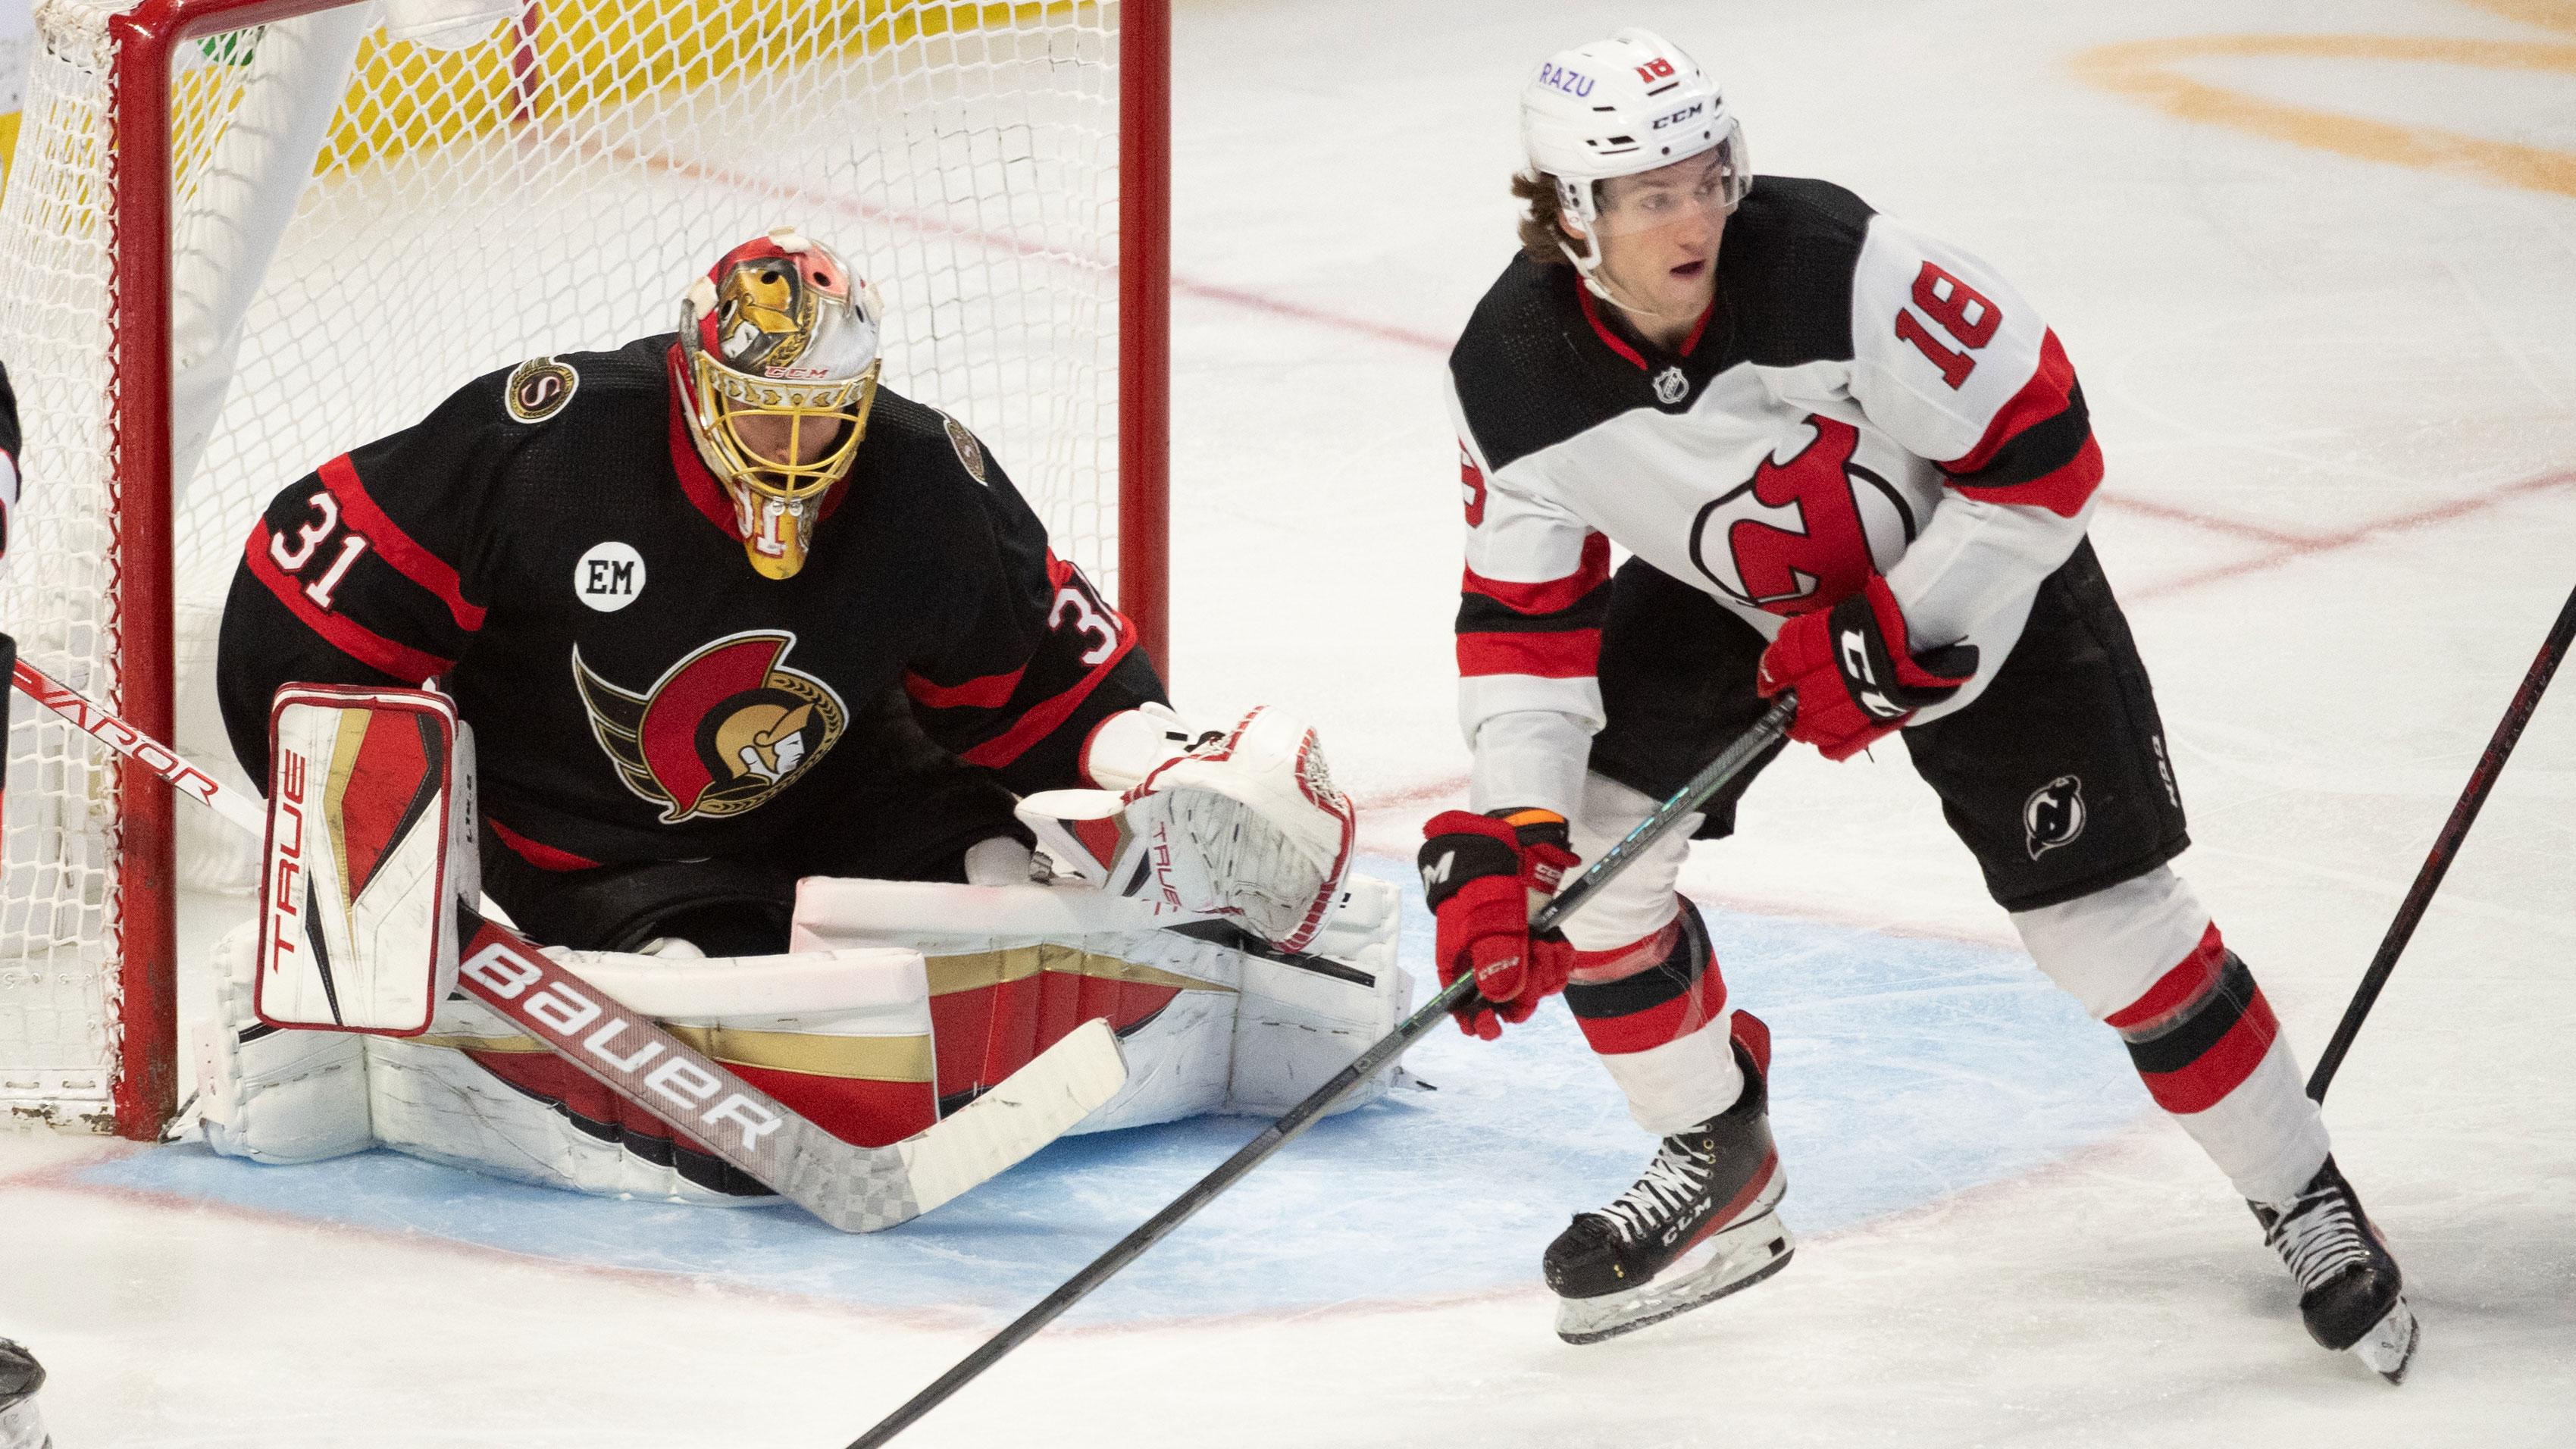 New Jersey Devils center Dawson Mercer (18) controls the puck in front of Ottawa Senators goalie Anton Forsberg (31) in the third period at the Canadian Tire Centre. / Marc DesRosiers-USA TODAY Sports